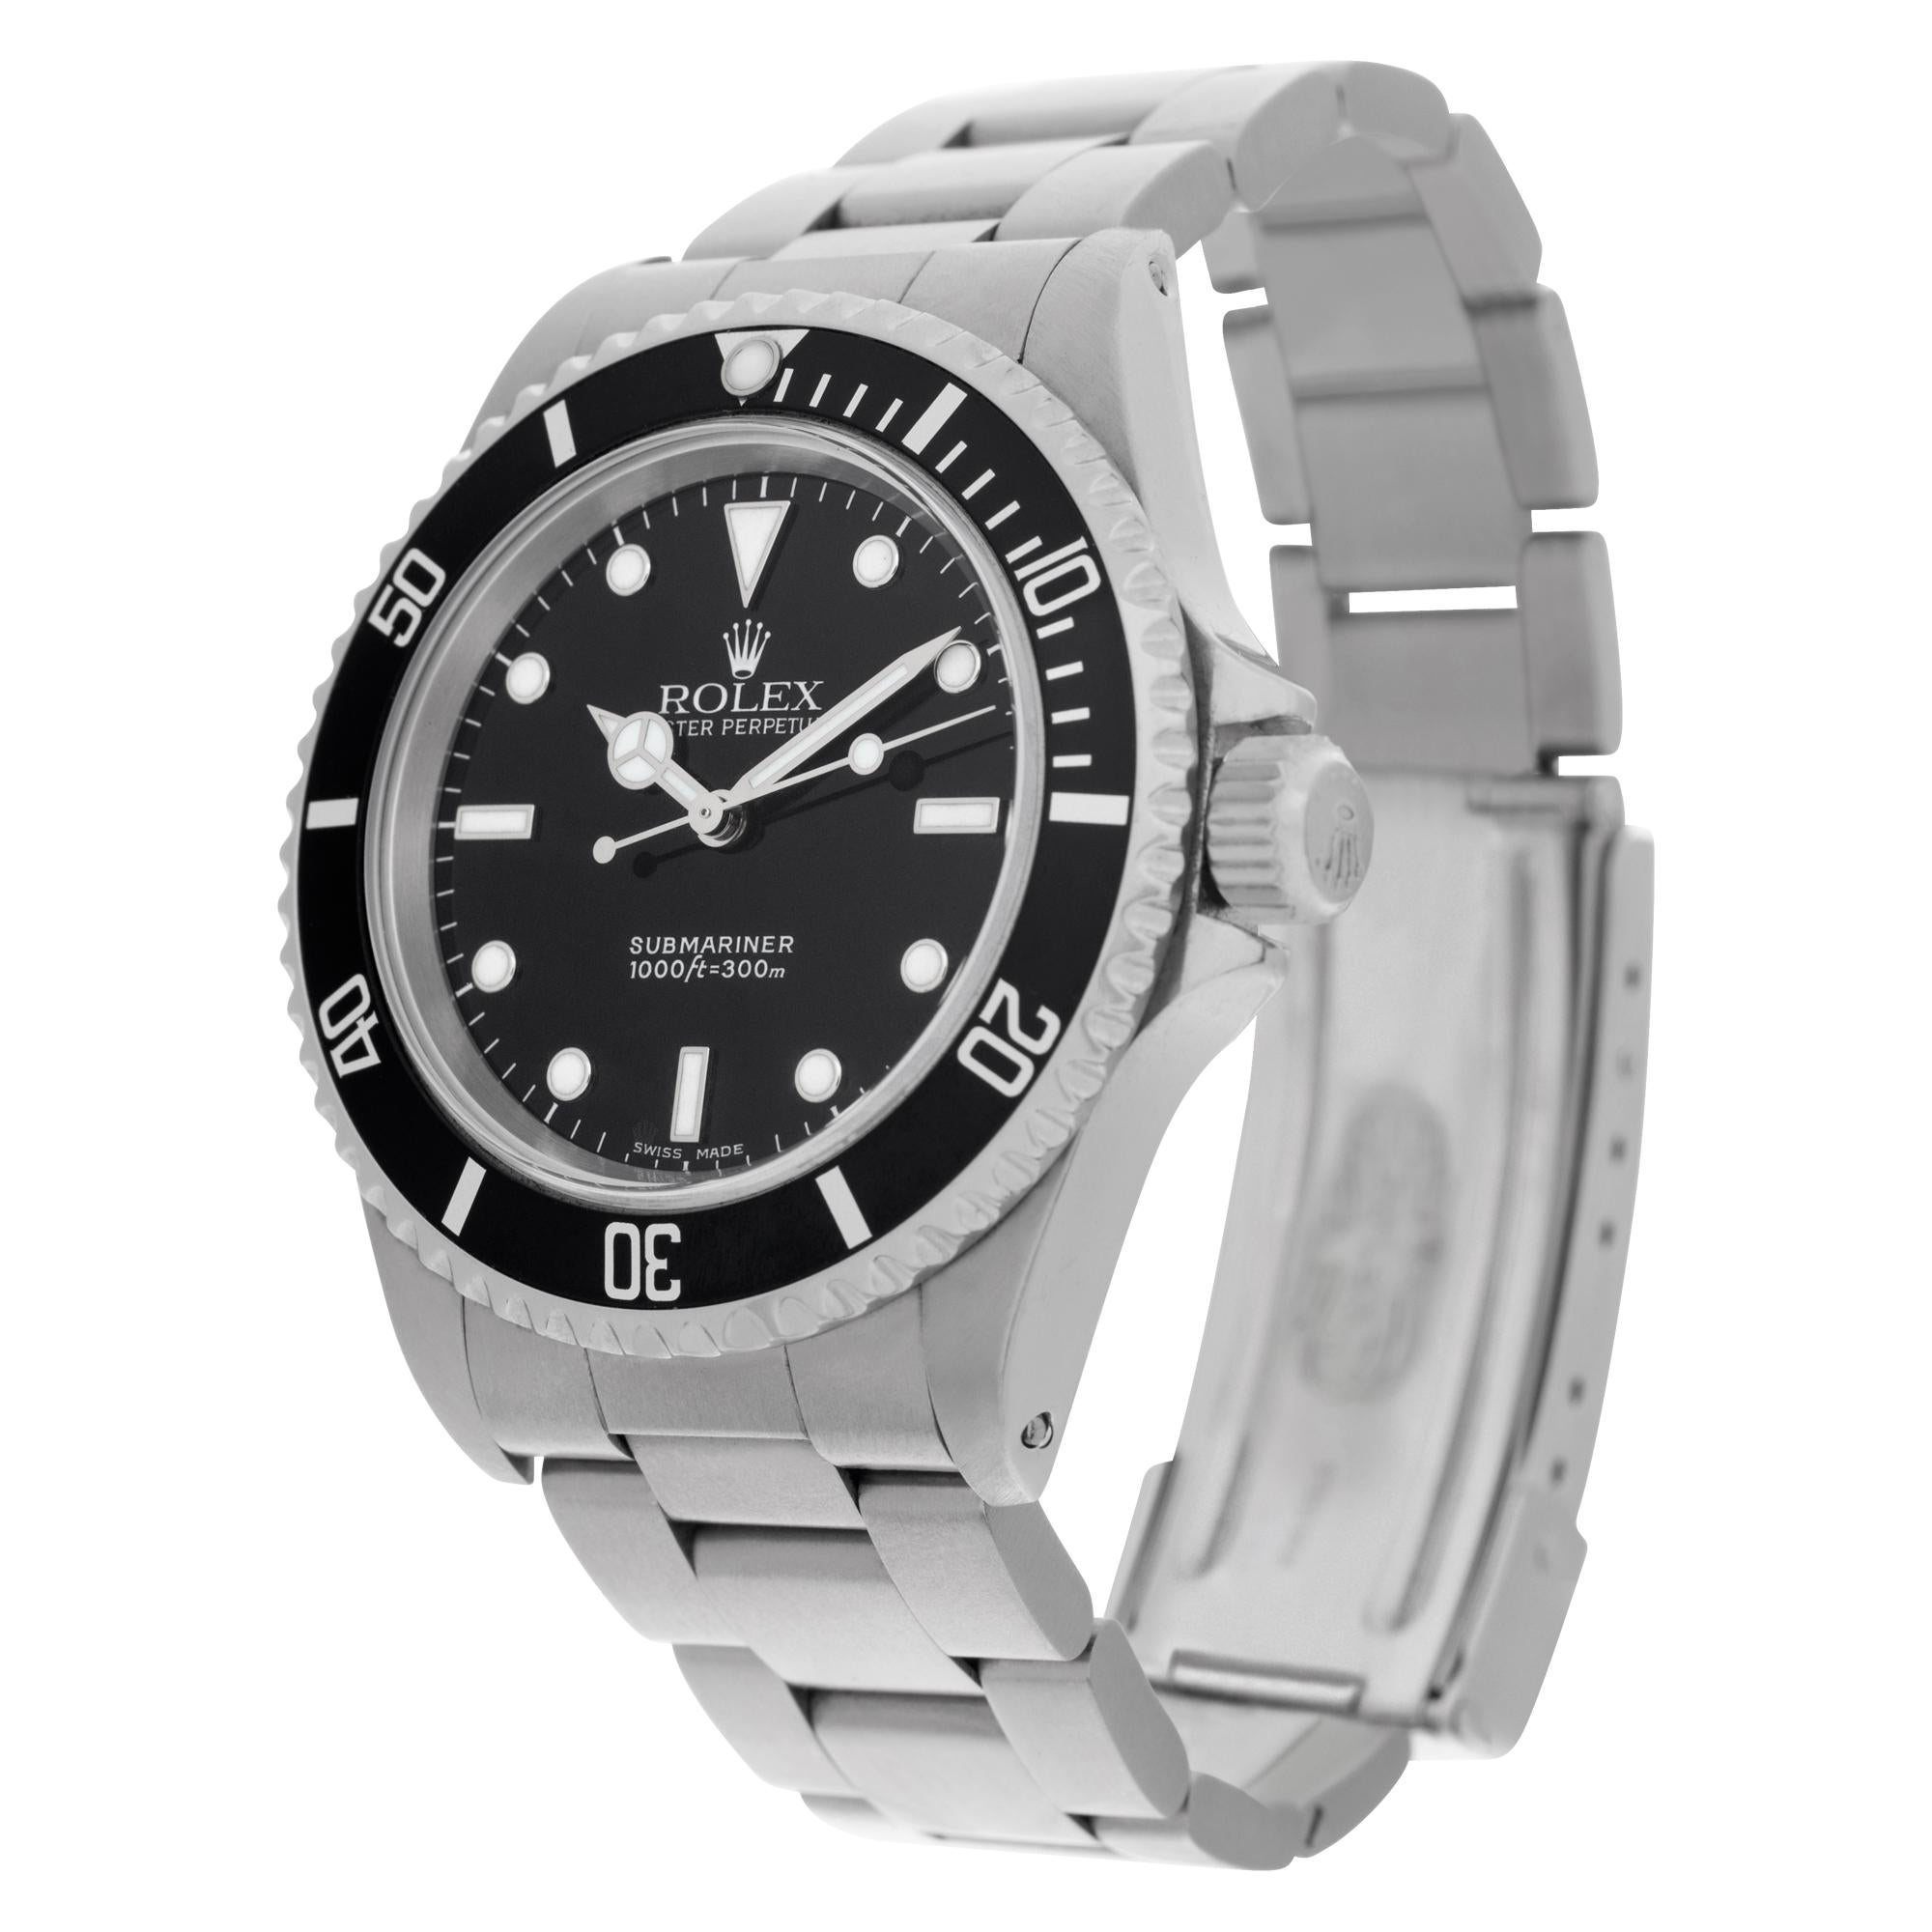 Rolex Submariner in stainless steel. Auto w/ sweep seconds. 40 mm case size. **Bank wire only at this price** Ref 14060M. Circa 2001. Fine Pre-owned Rolex Watch.

Certified preowned Sport Rolex Submariner 14060M watch is made out of Stainless steel